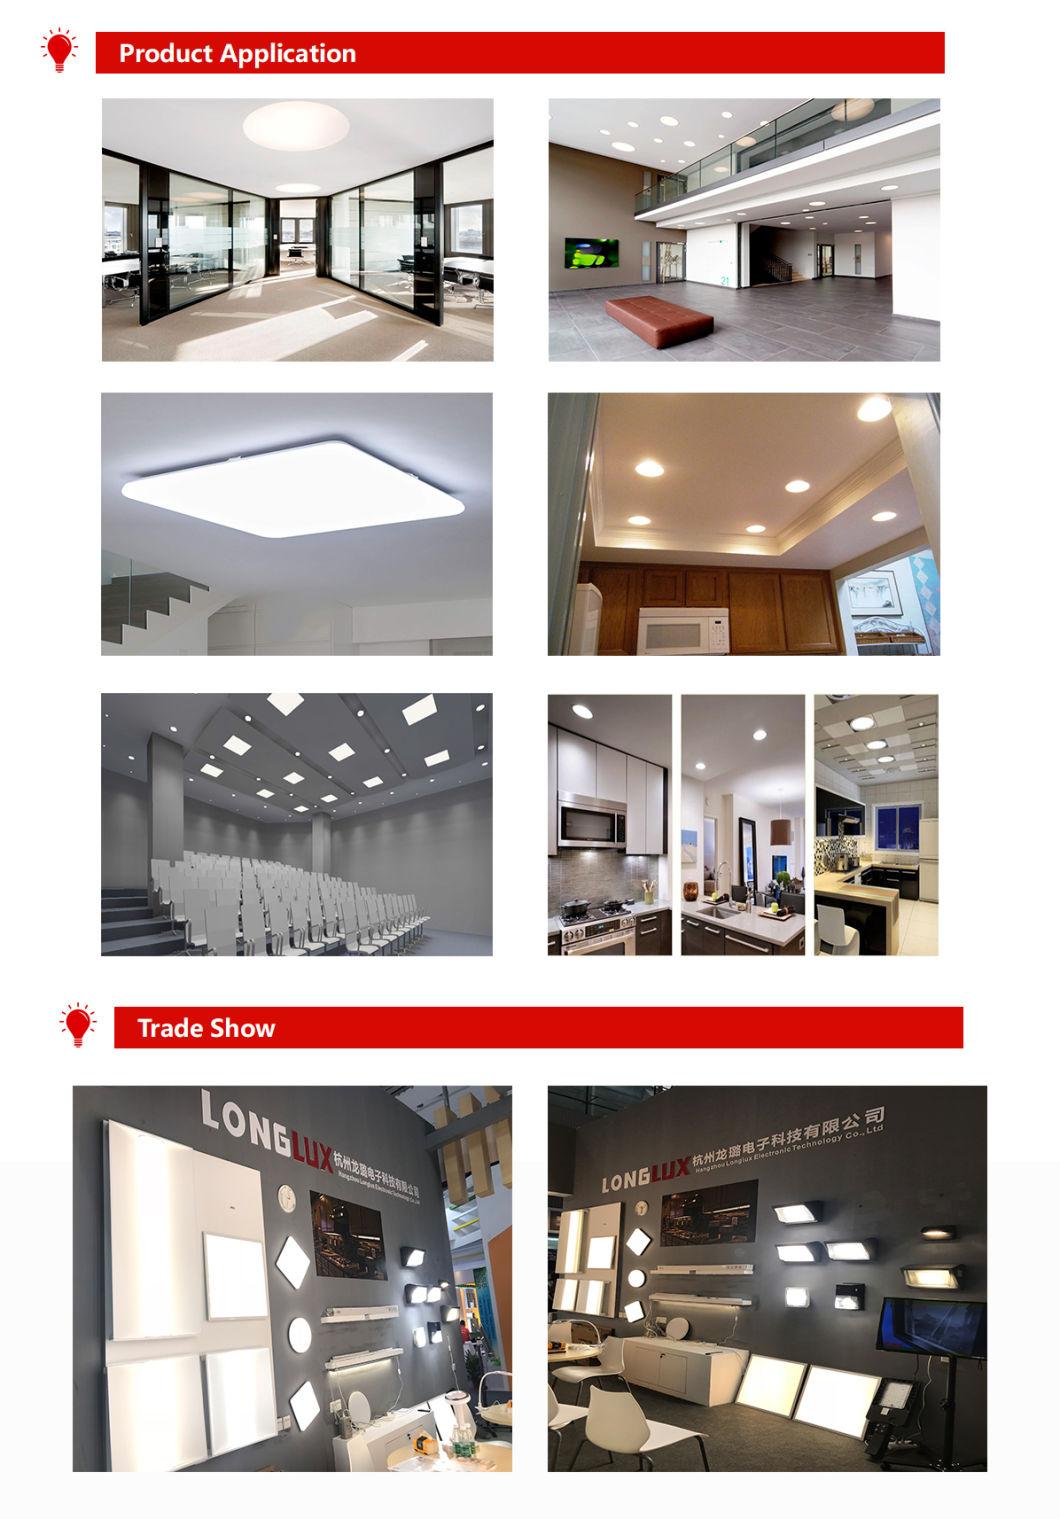 Triac CCT Dimmable IP54 LED Ceiling Light with Bluetooth Function